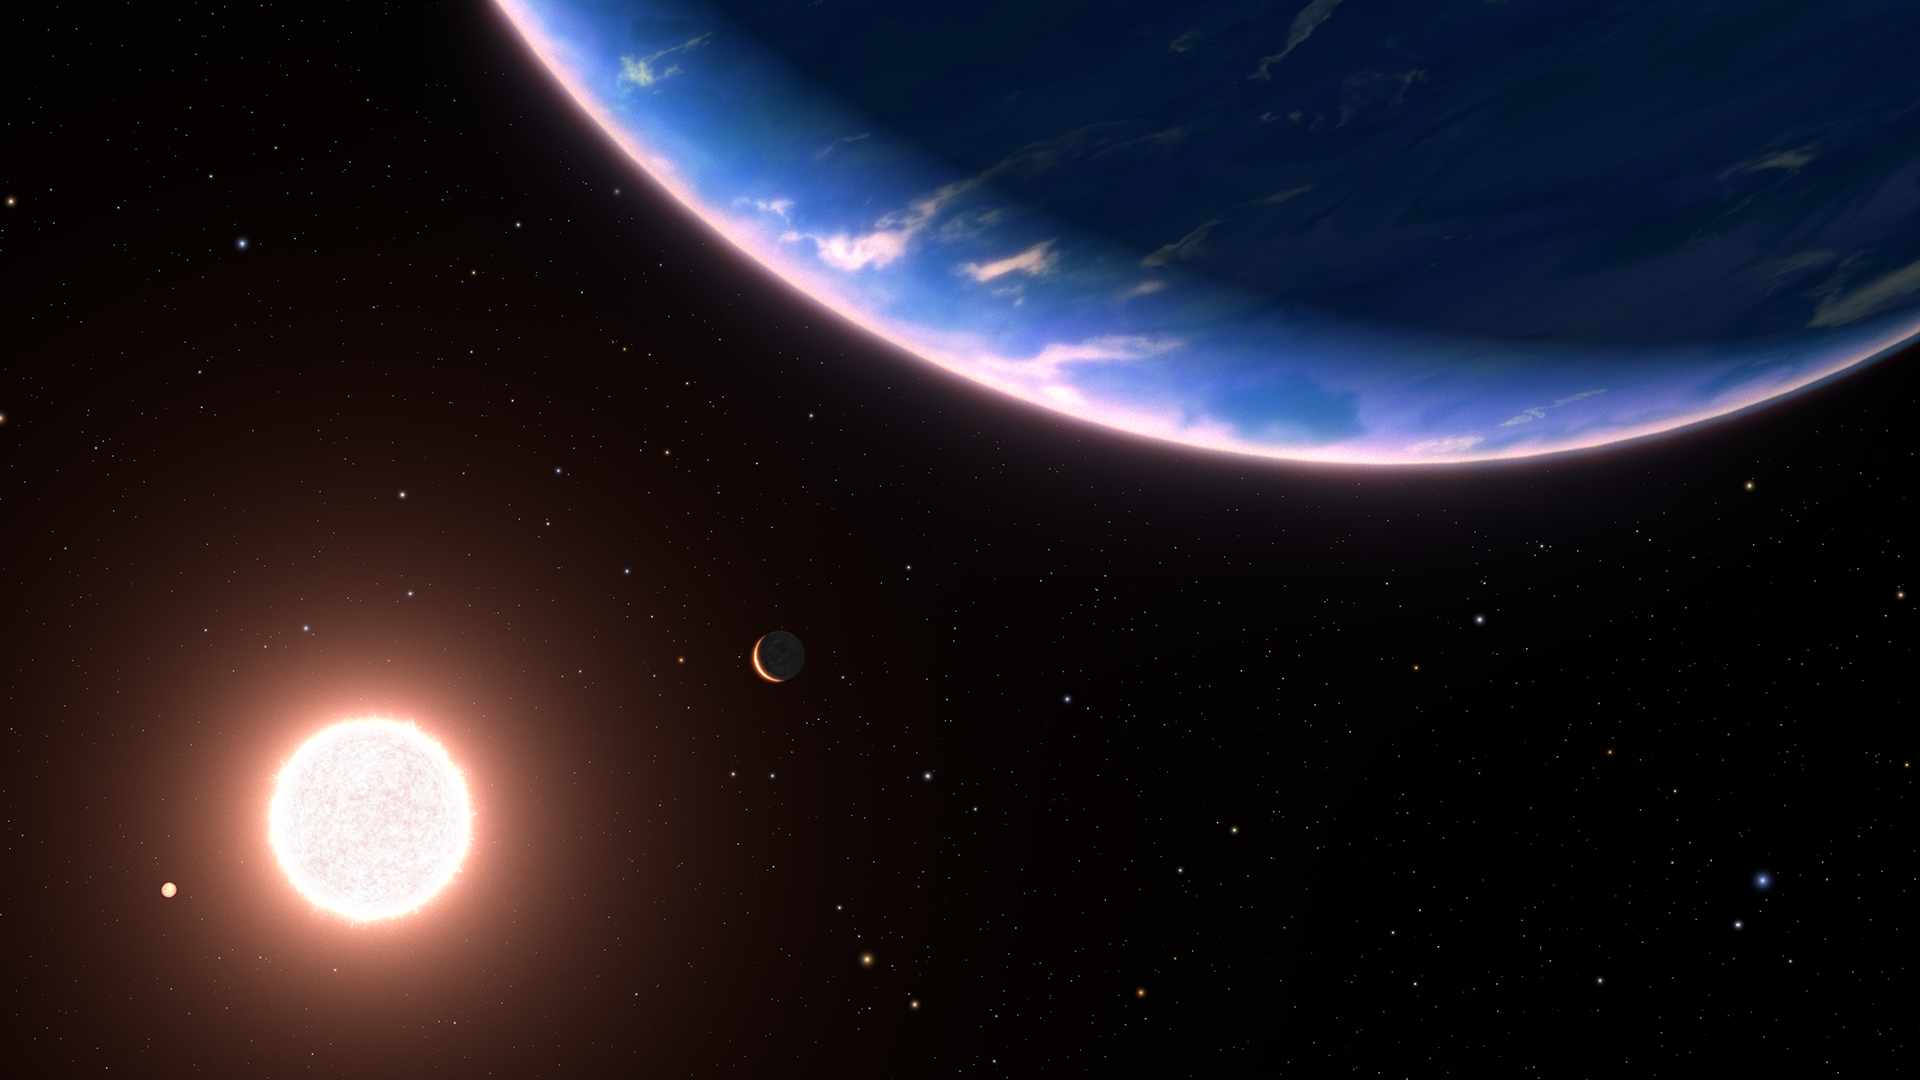 Occupying the upper half of this illustration is the foreground exoplanet, partly in shadow, with subtle blue and white atmospheric features along the crescent closest to the star. The planet appears above a red dwarf star, which is represented by a smaller reddish-white, mottled globe at the bottom left. Two other planets in this system are to the left and right of the red dwarf star. The second planet is slightly larger, but appears farther away, about midway between the star and the foreground exoplanet. It is in shadow, with only the crescent facing the star bathed in light. The planetary system is on a mostly black background speckled with hundreds of faint distant stars.